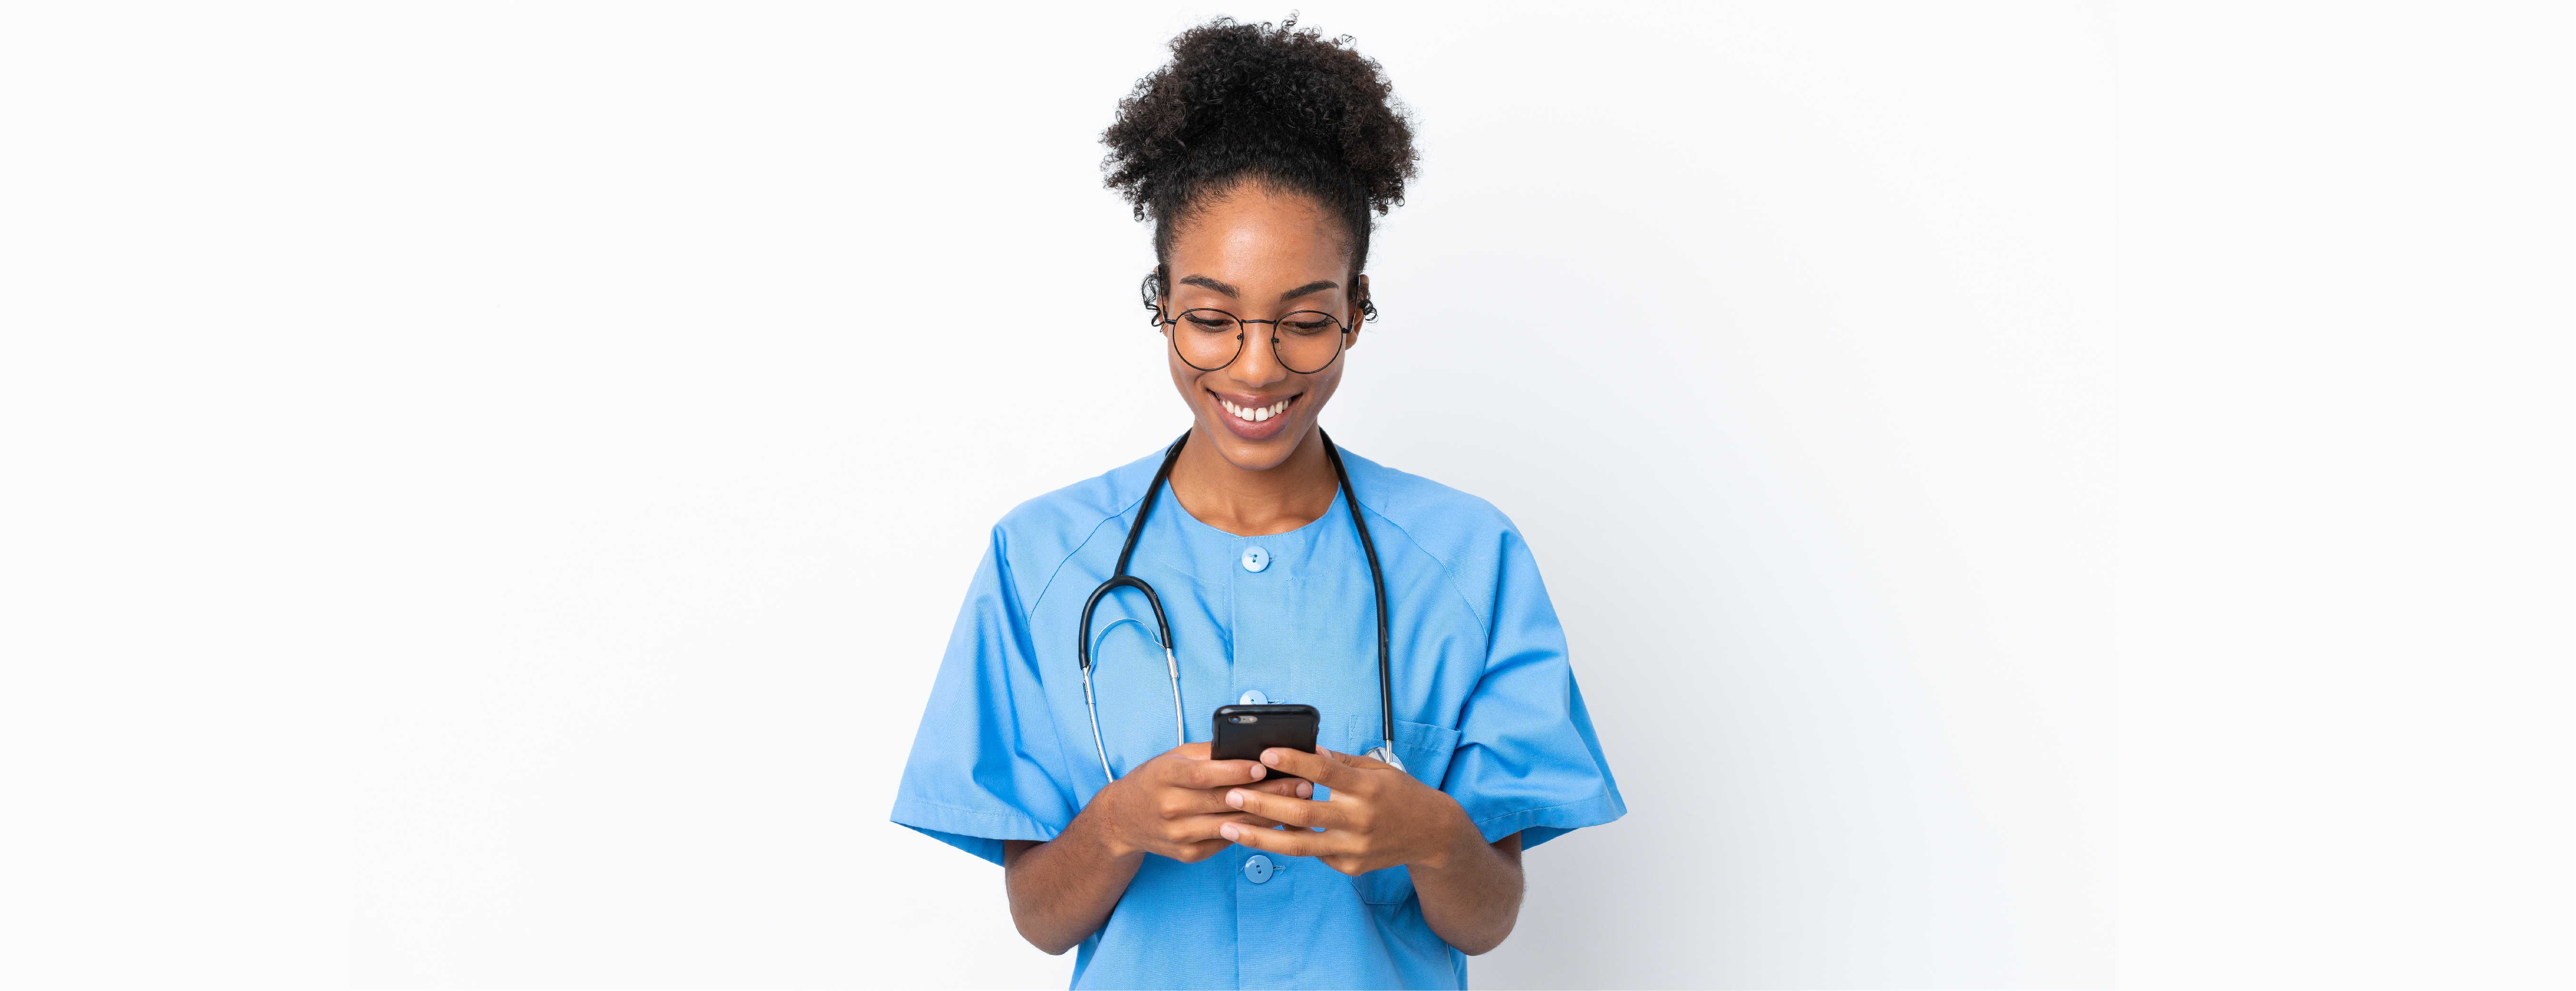 Fast Track Your RN Career with the Power of Social